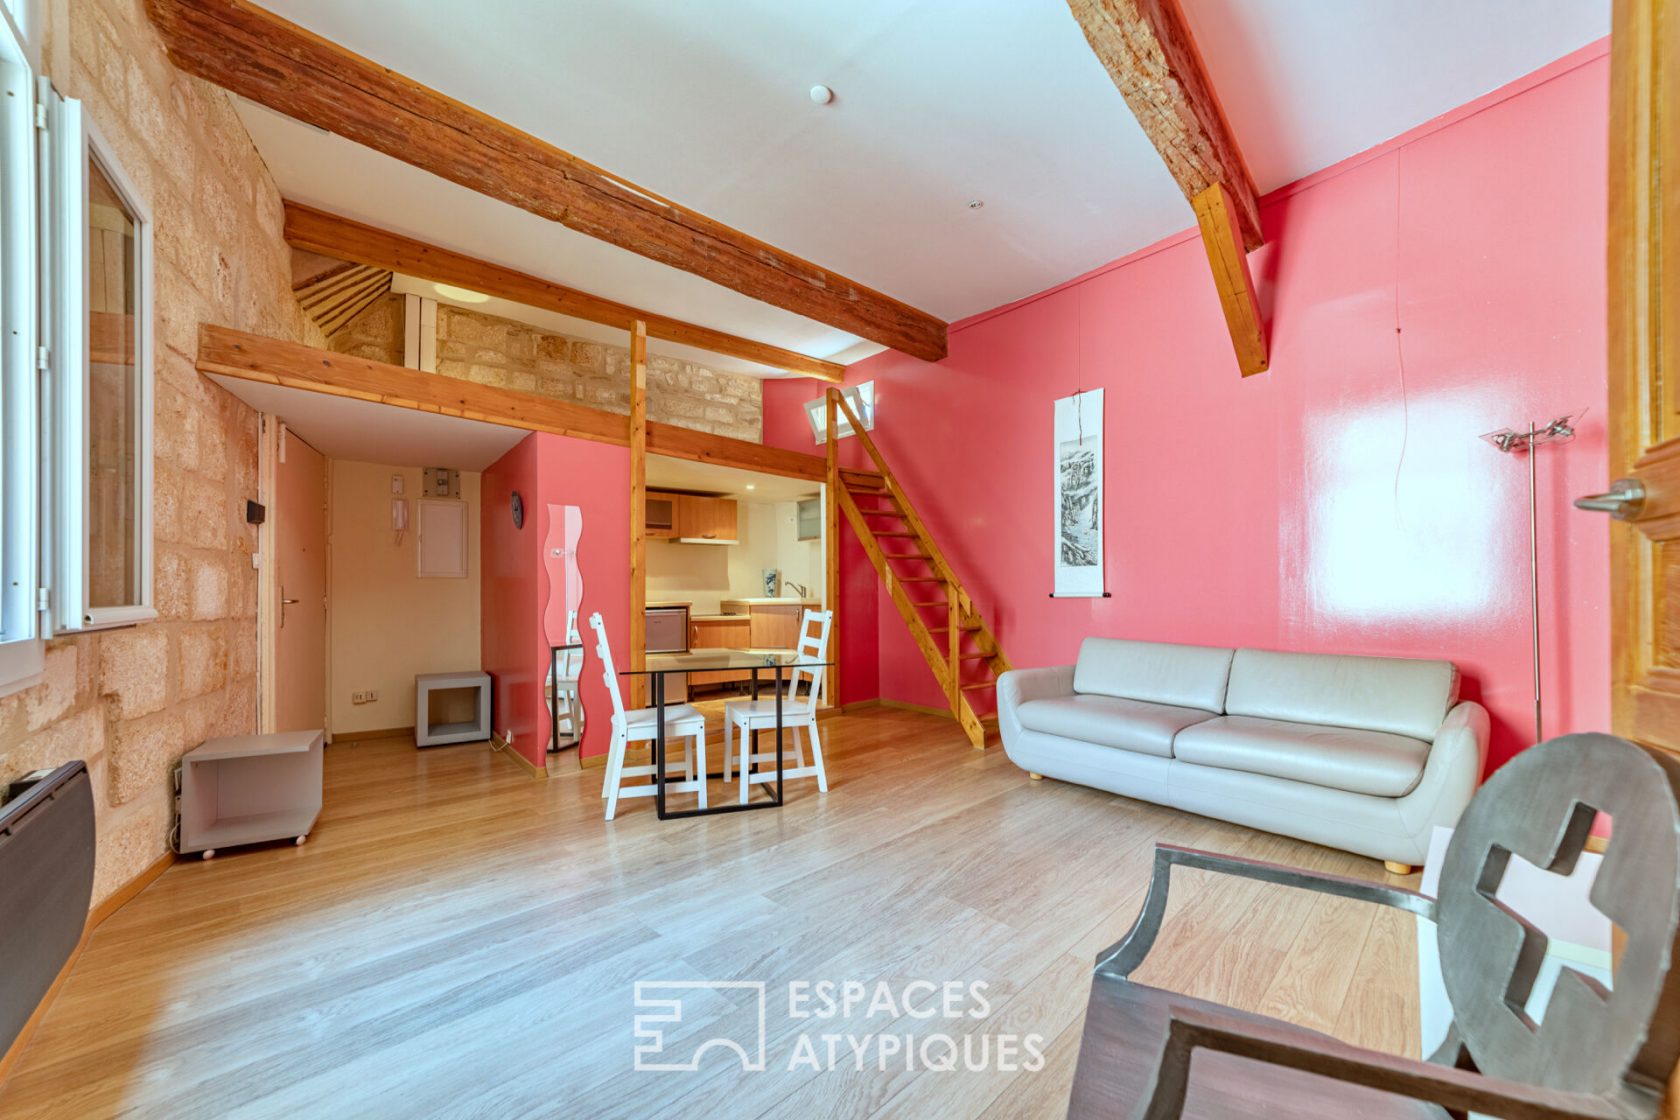 The ideal pied-à-terre in the heart of the Ecusson